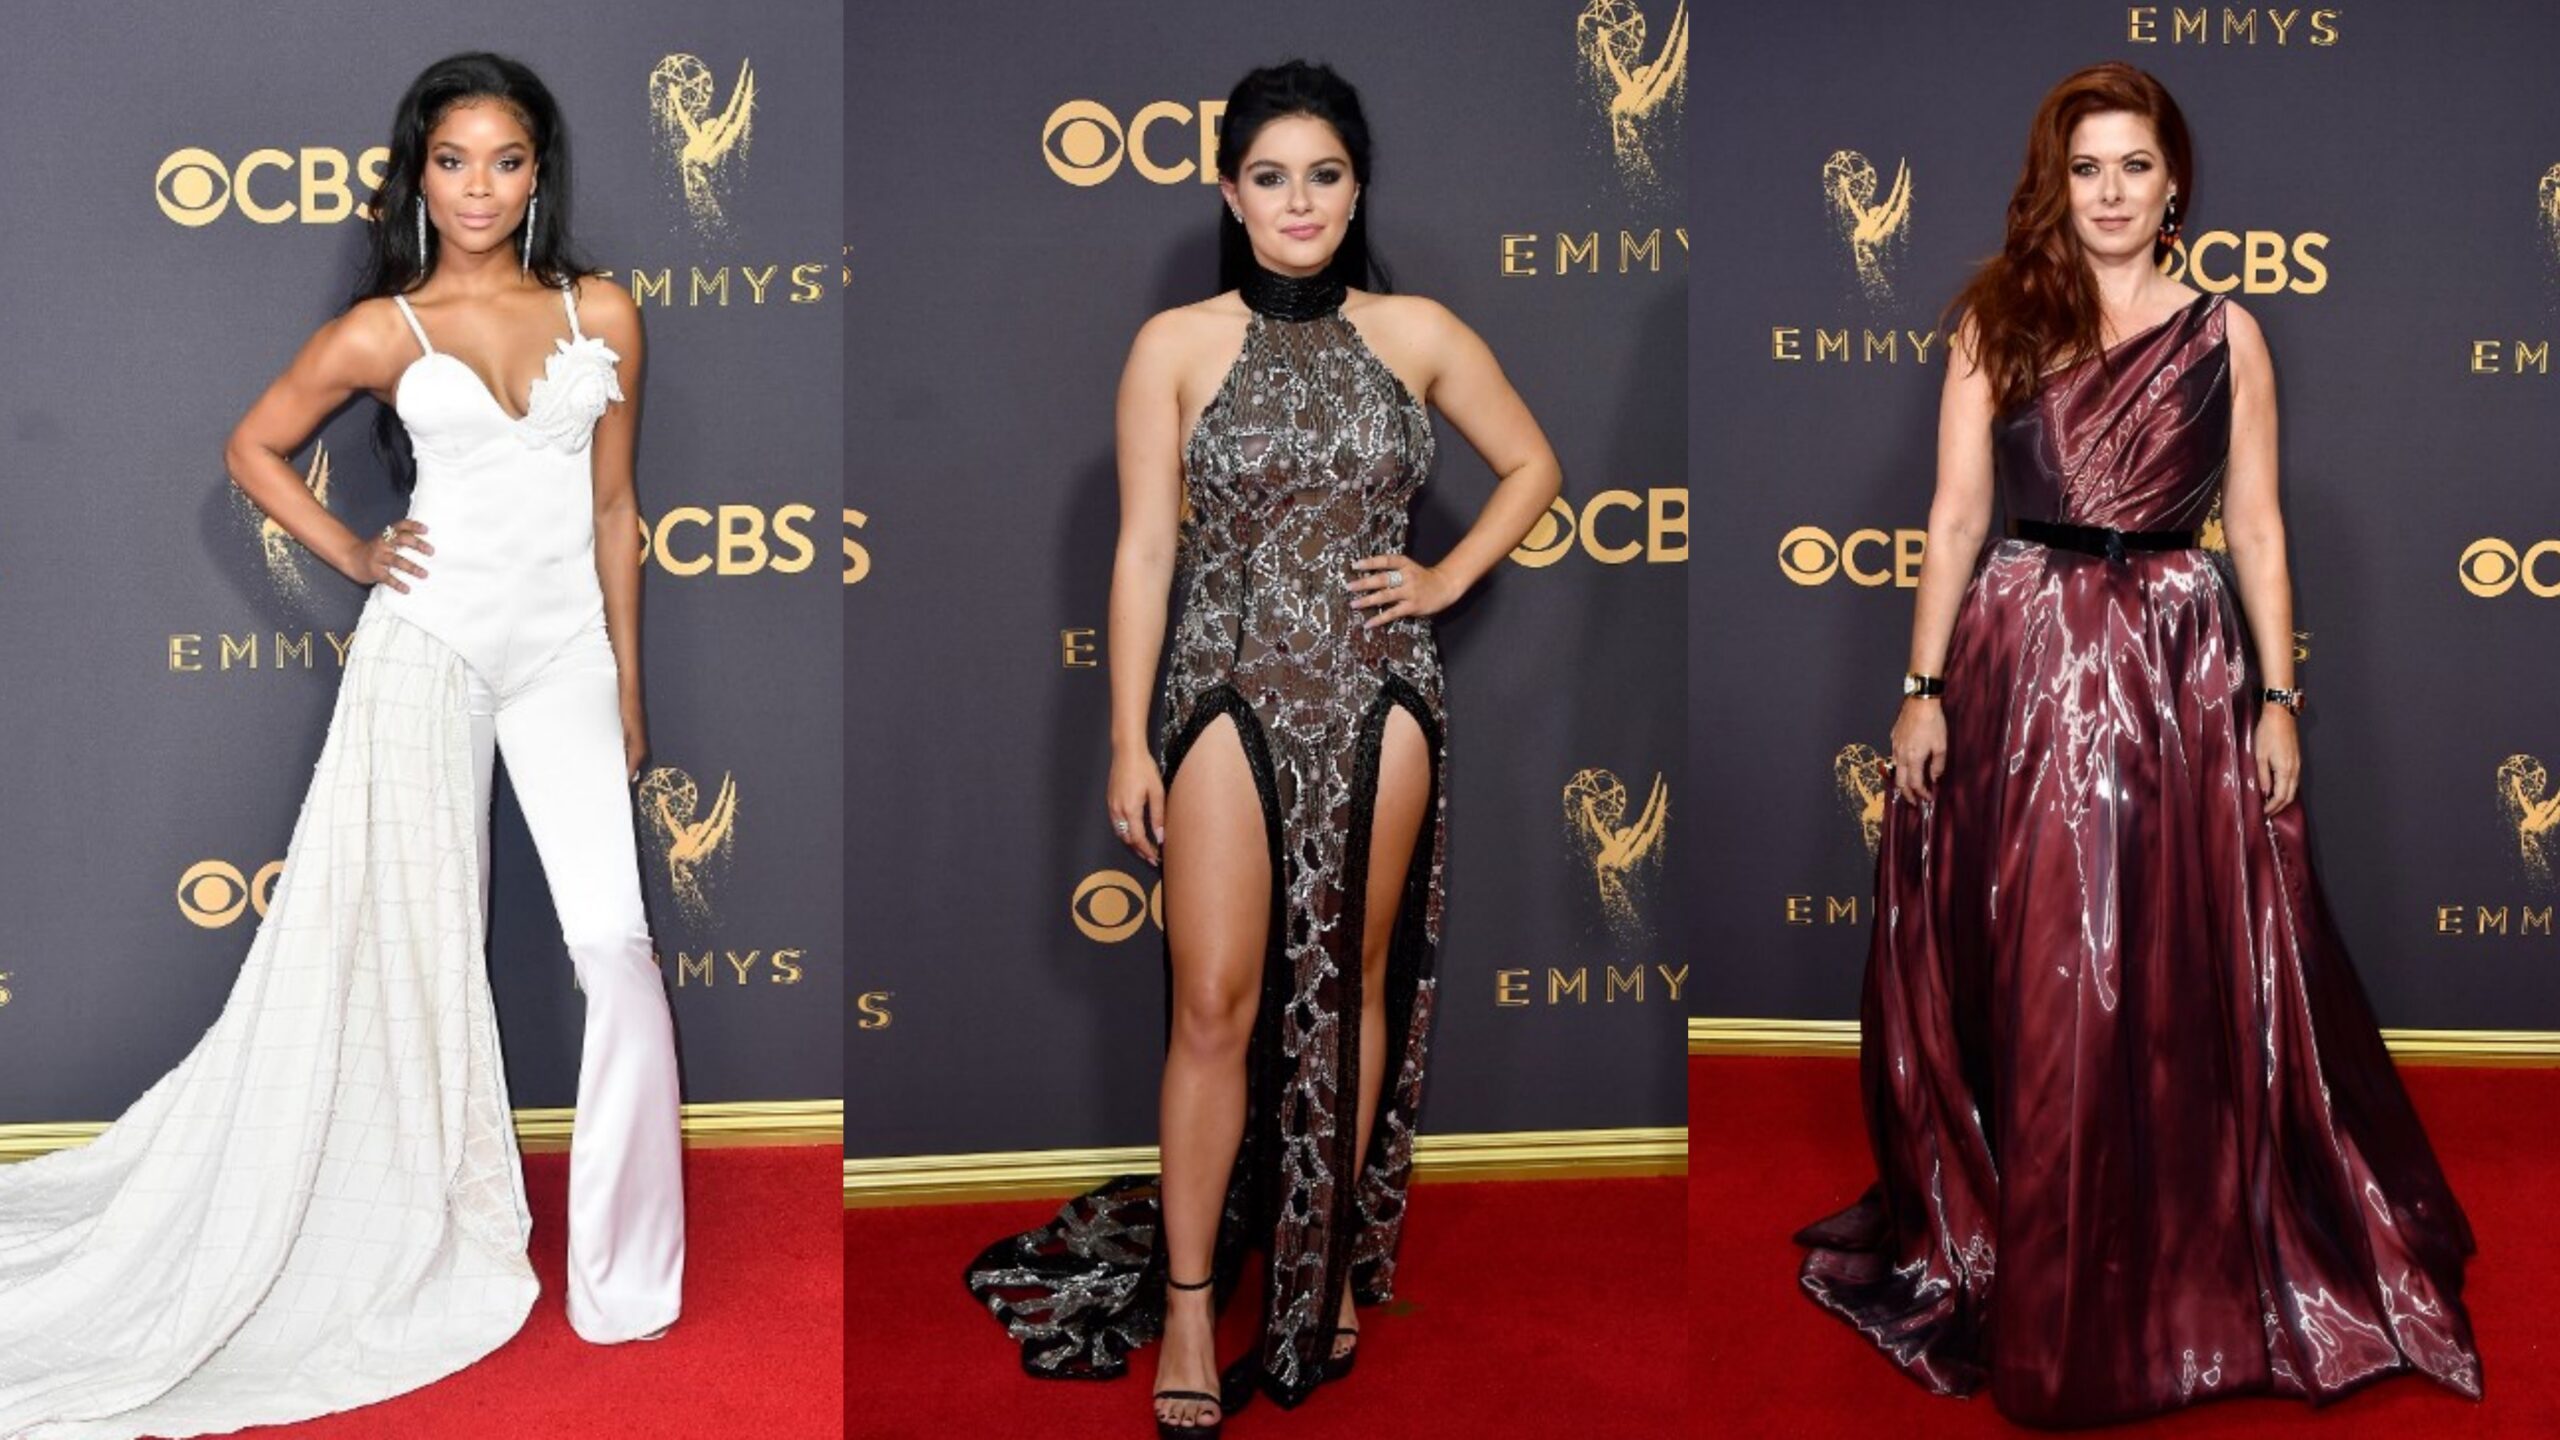 Emmys fashion 2017: What were they thinking?!